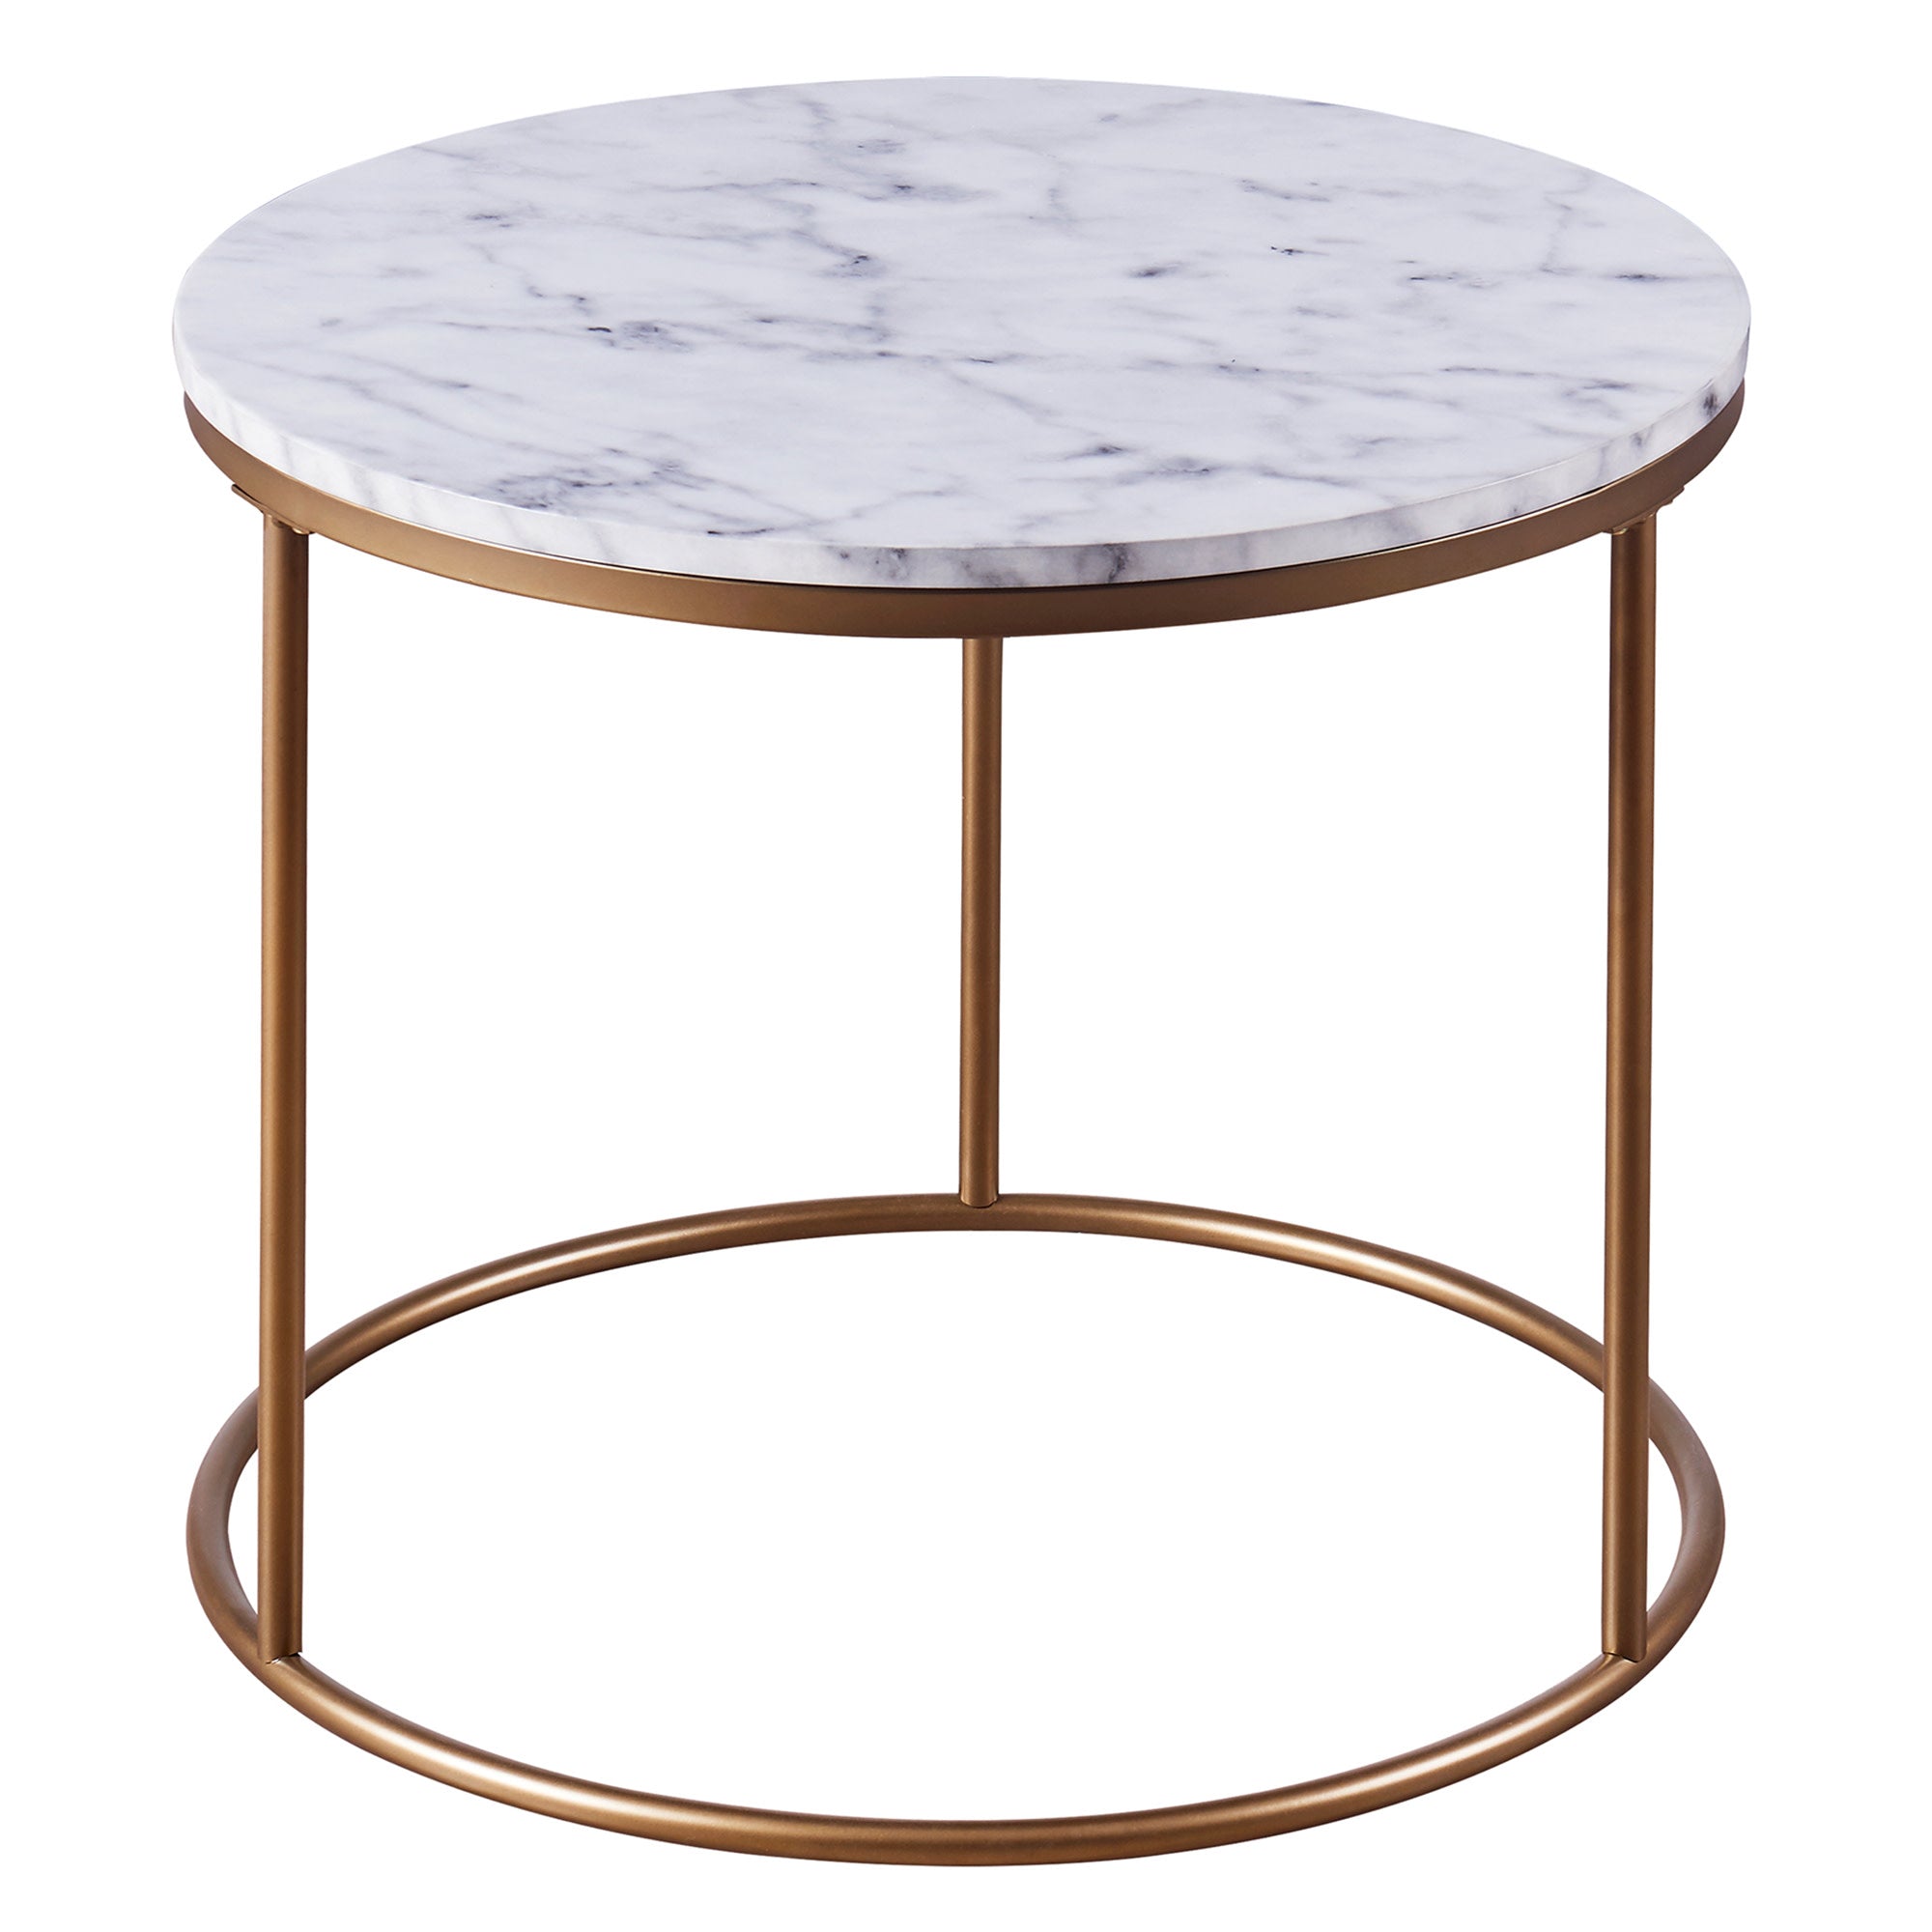 Teamson Home Marmo Round Side Table with Open Base & Faux White Marble Top, White/Brass